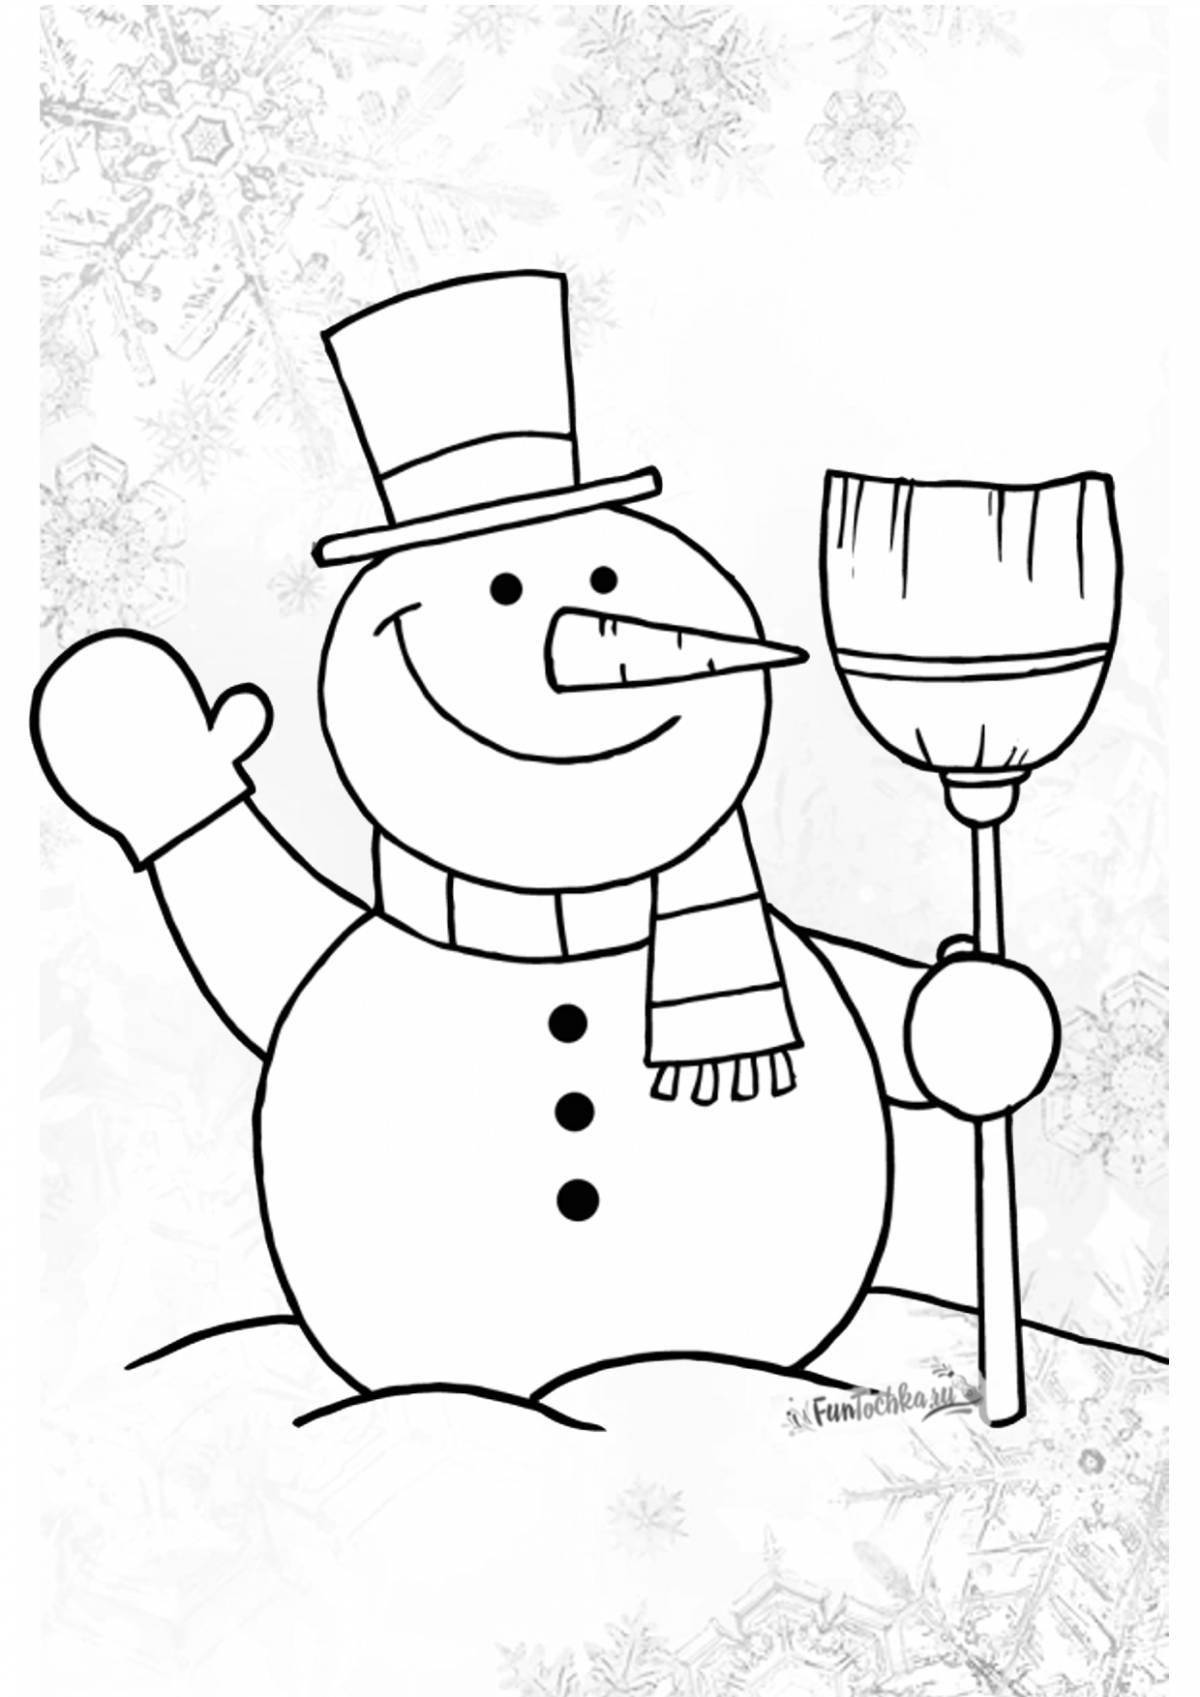 Playful snowman coloring book for kids 3 4